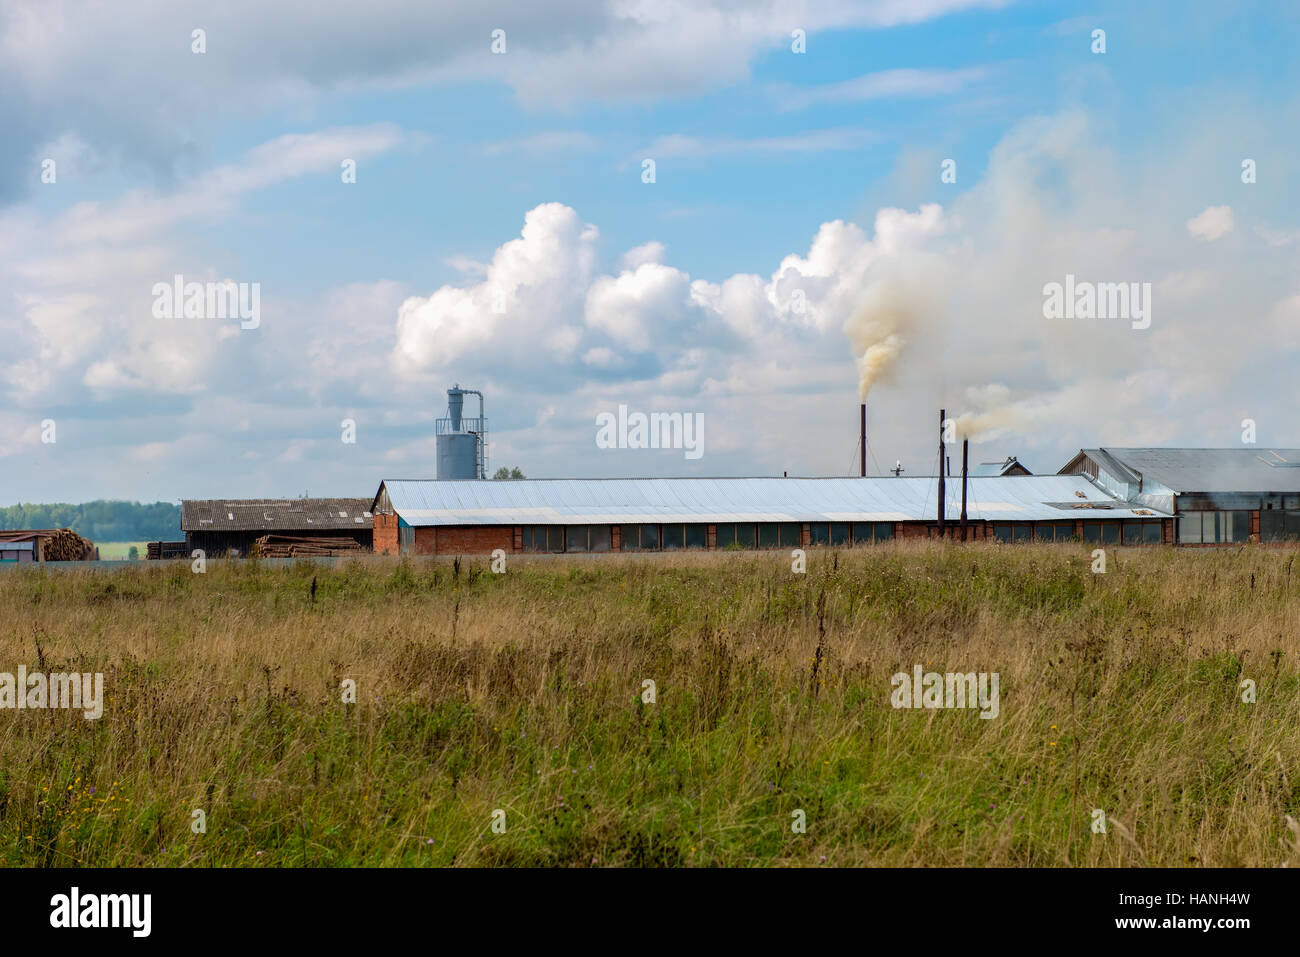 View of a factory in the middle of a green field in the early morning. Factory pipes polluting air, a serious environmental issue Stock Photo